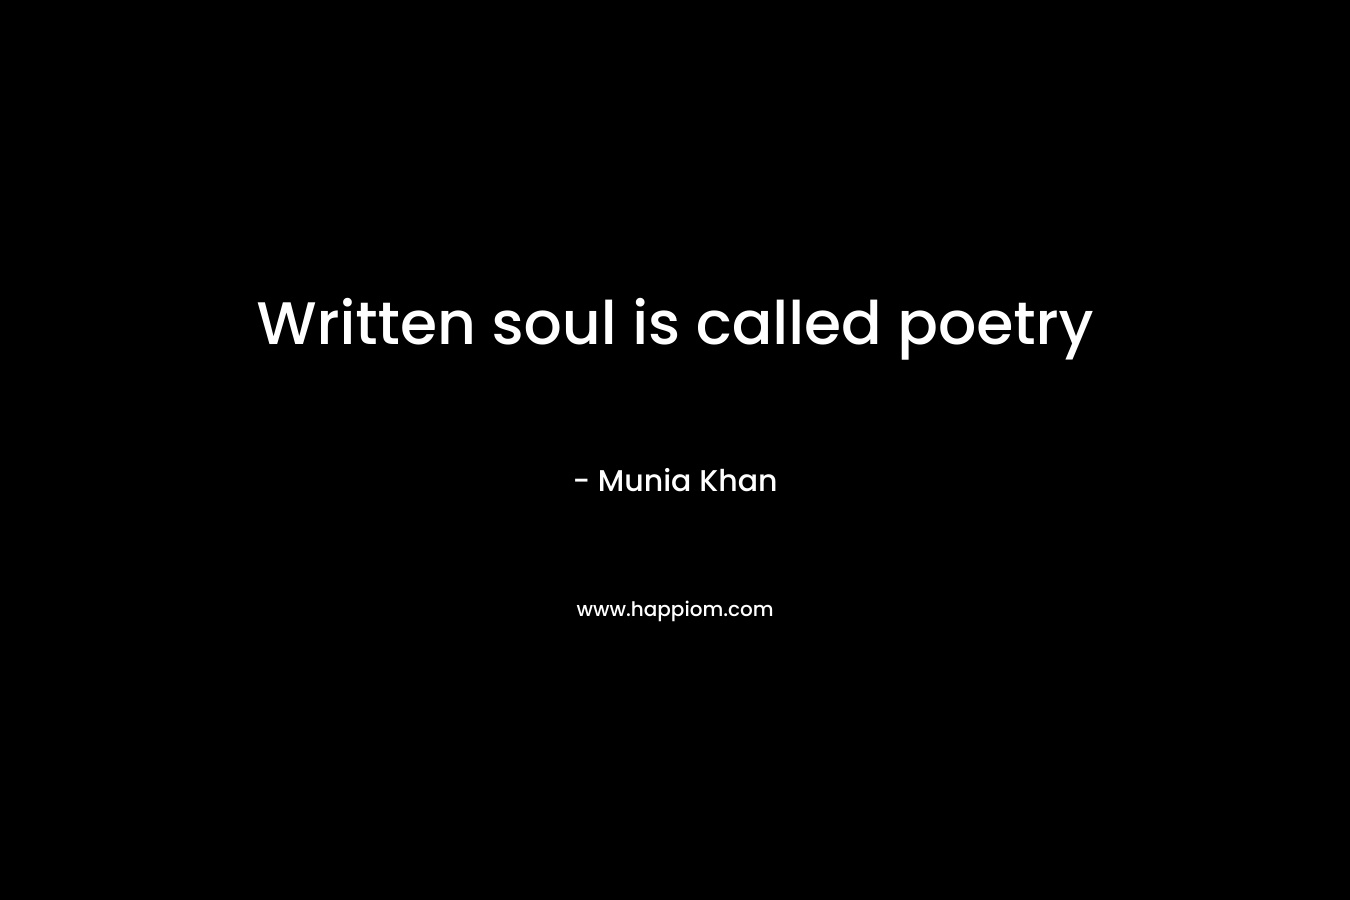 Written soul is called poetry